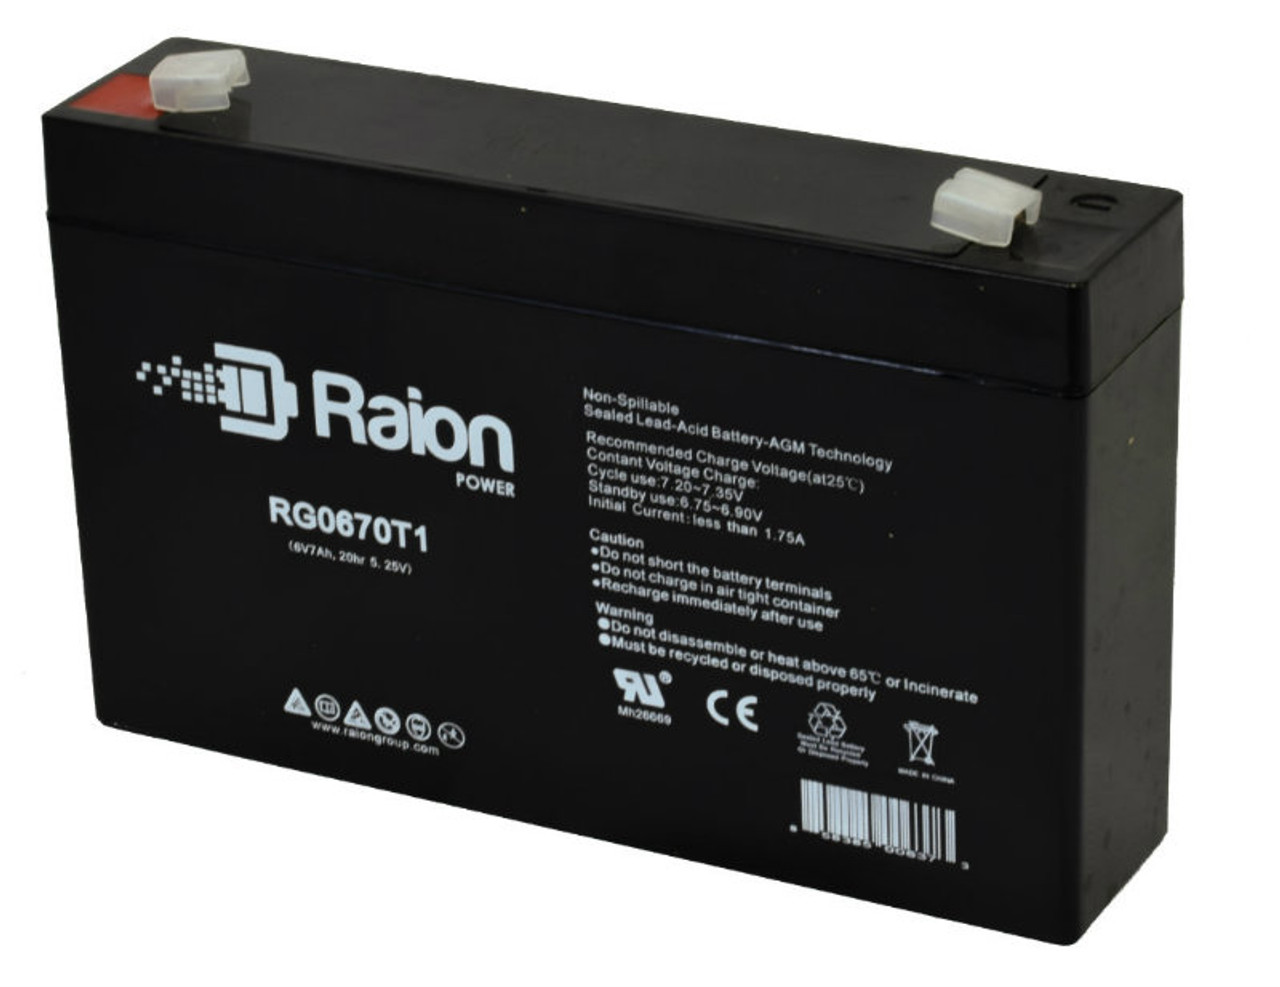 Raion Power RG0670T1 6V 7Ah Replacement Battery Cartridge for Philips Medical Systems Pagewriter 200 Medical Equipment